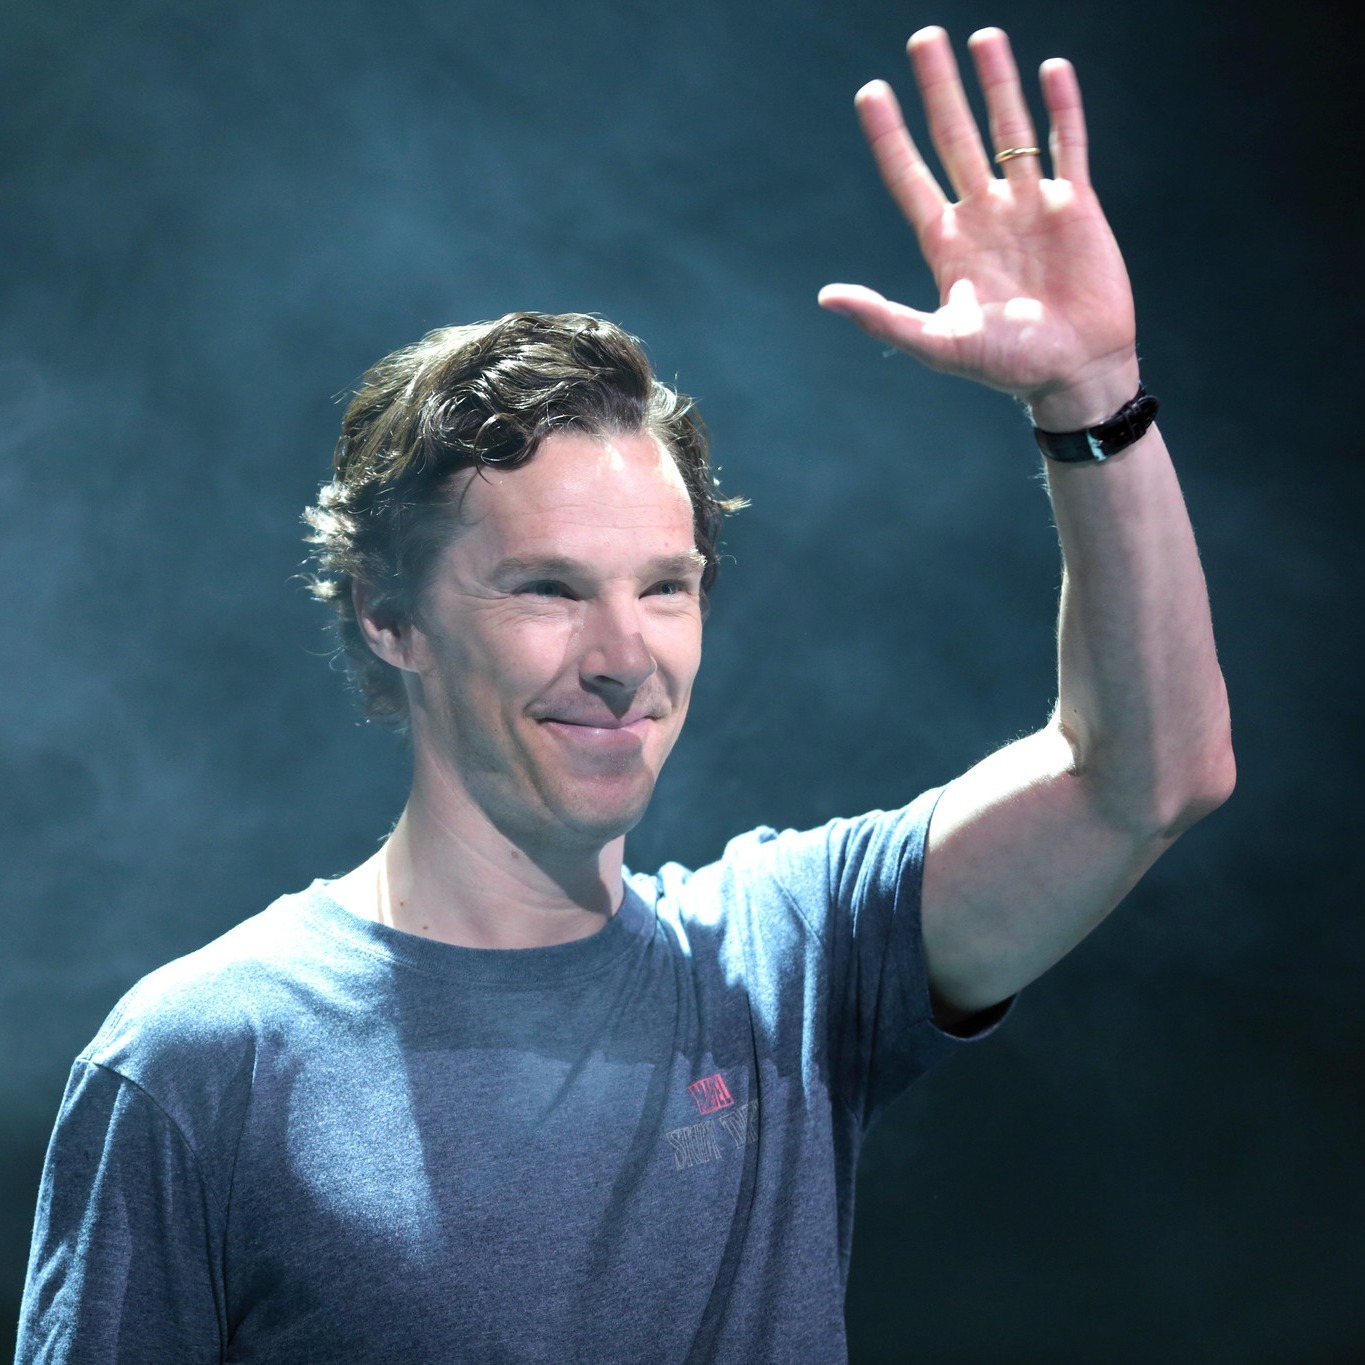 Benedict Cumberbatch waves off his guests after they have joined him for an afternoon of bouncy castle hire - apparently